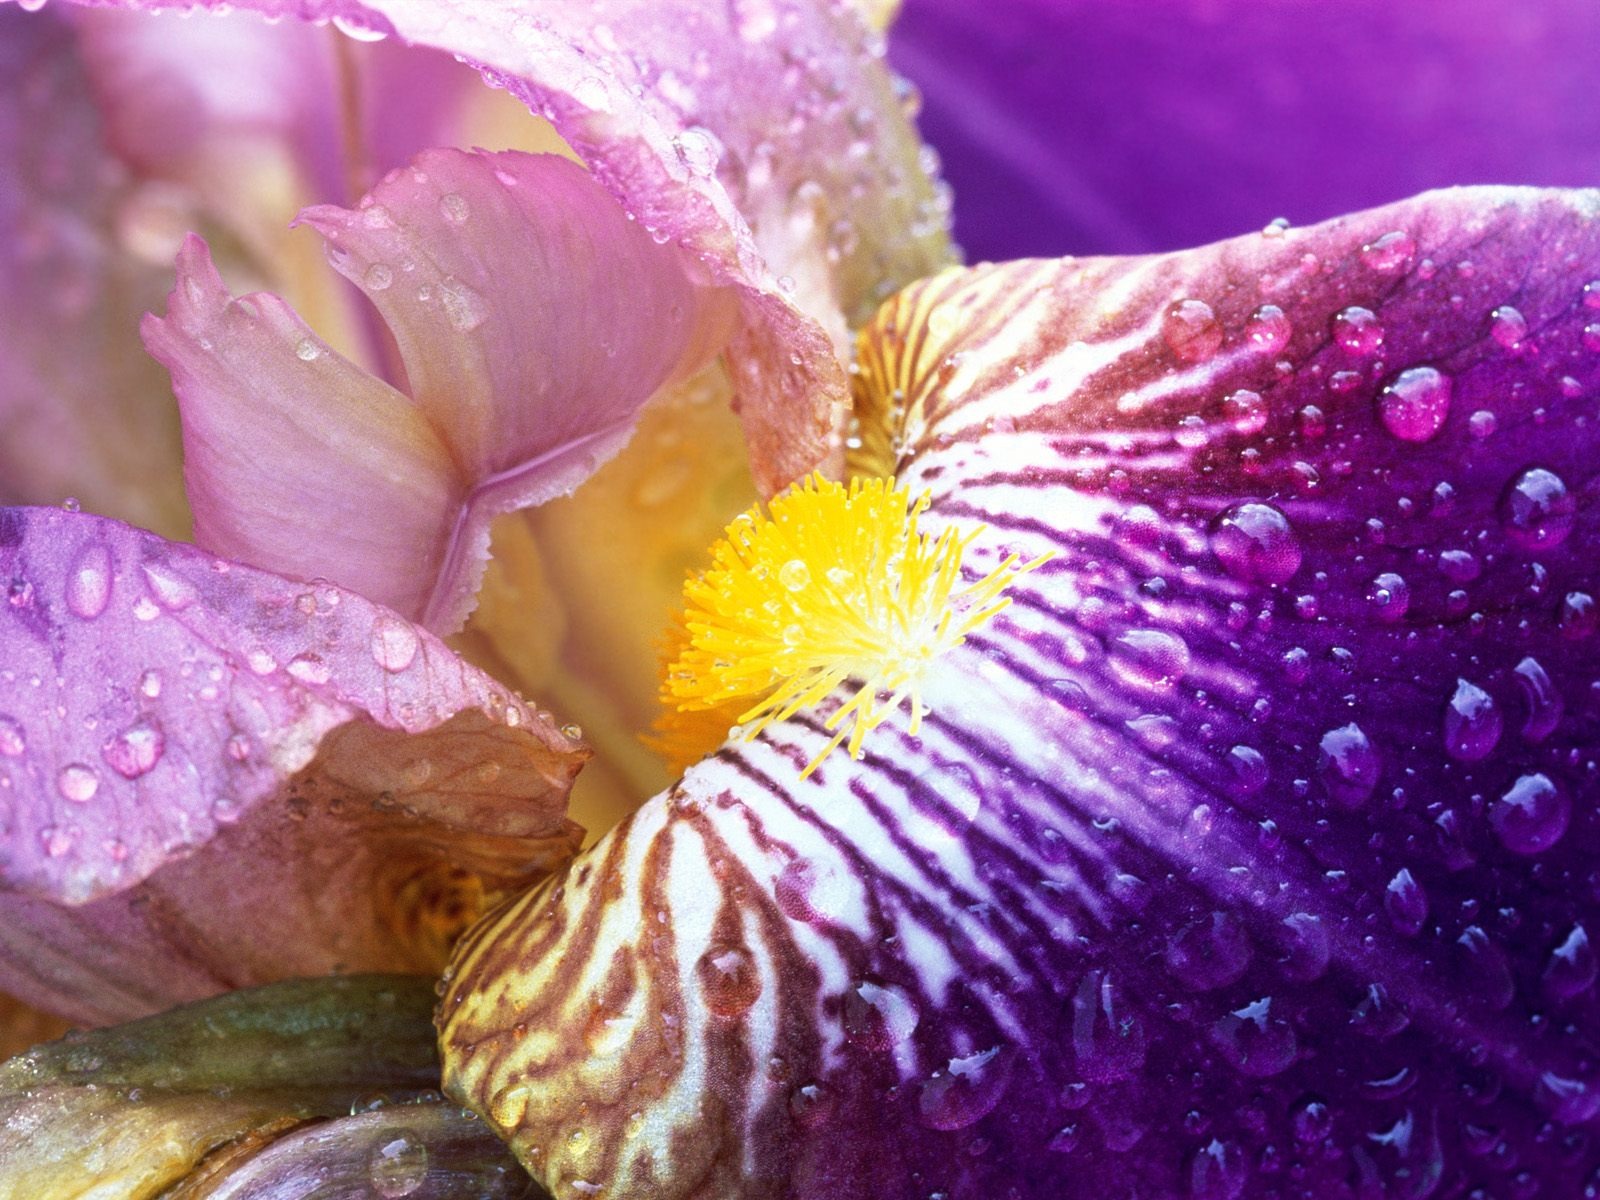 Iris Close Up Wallpaper Flowers Nature Wallpapers in jpg format for ...